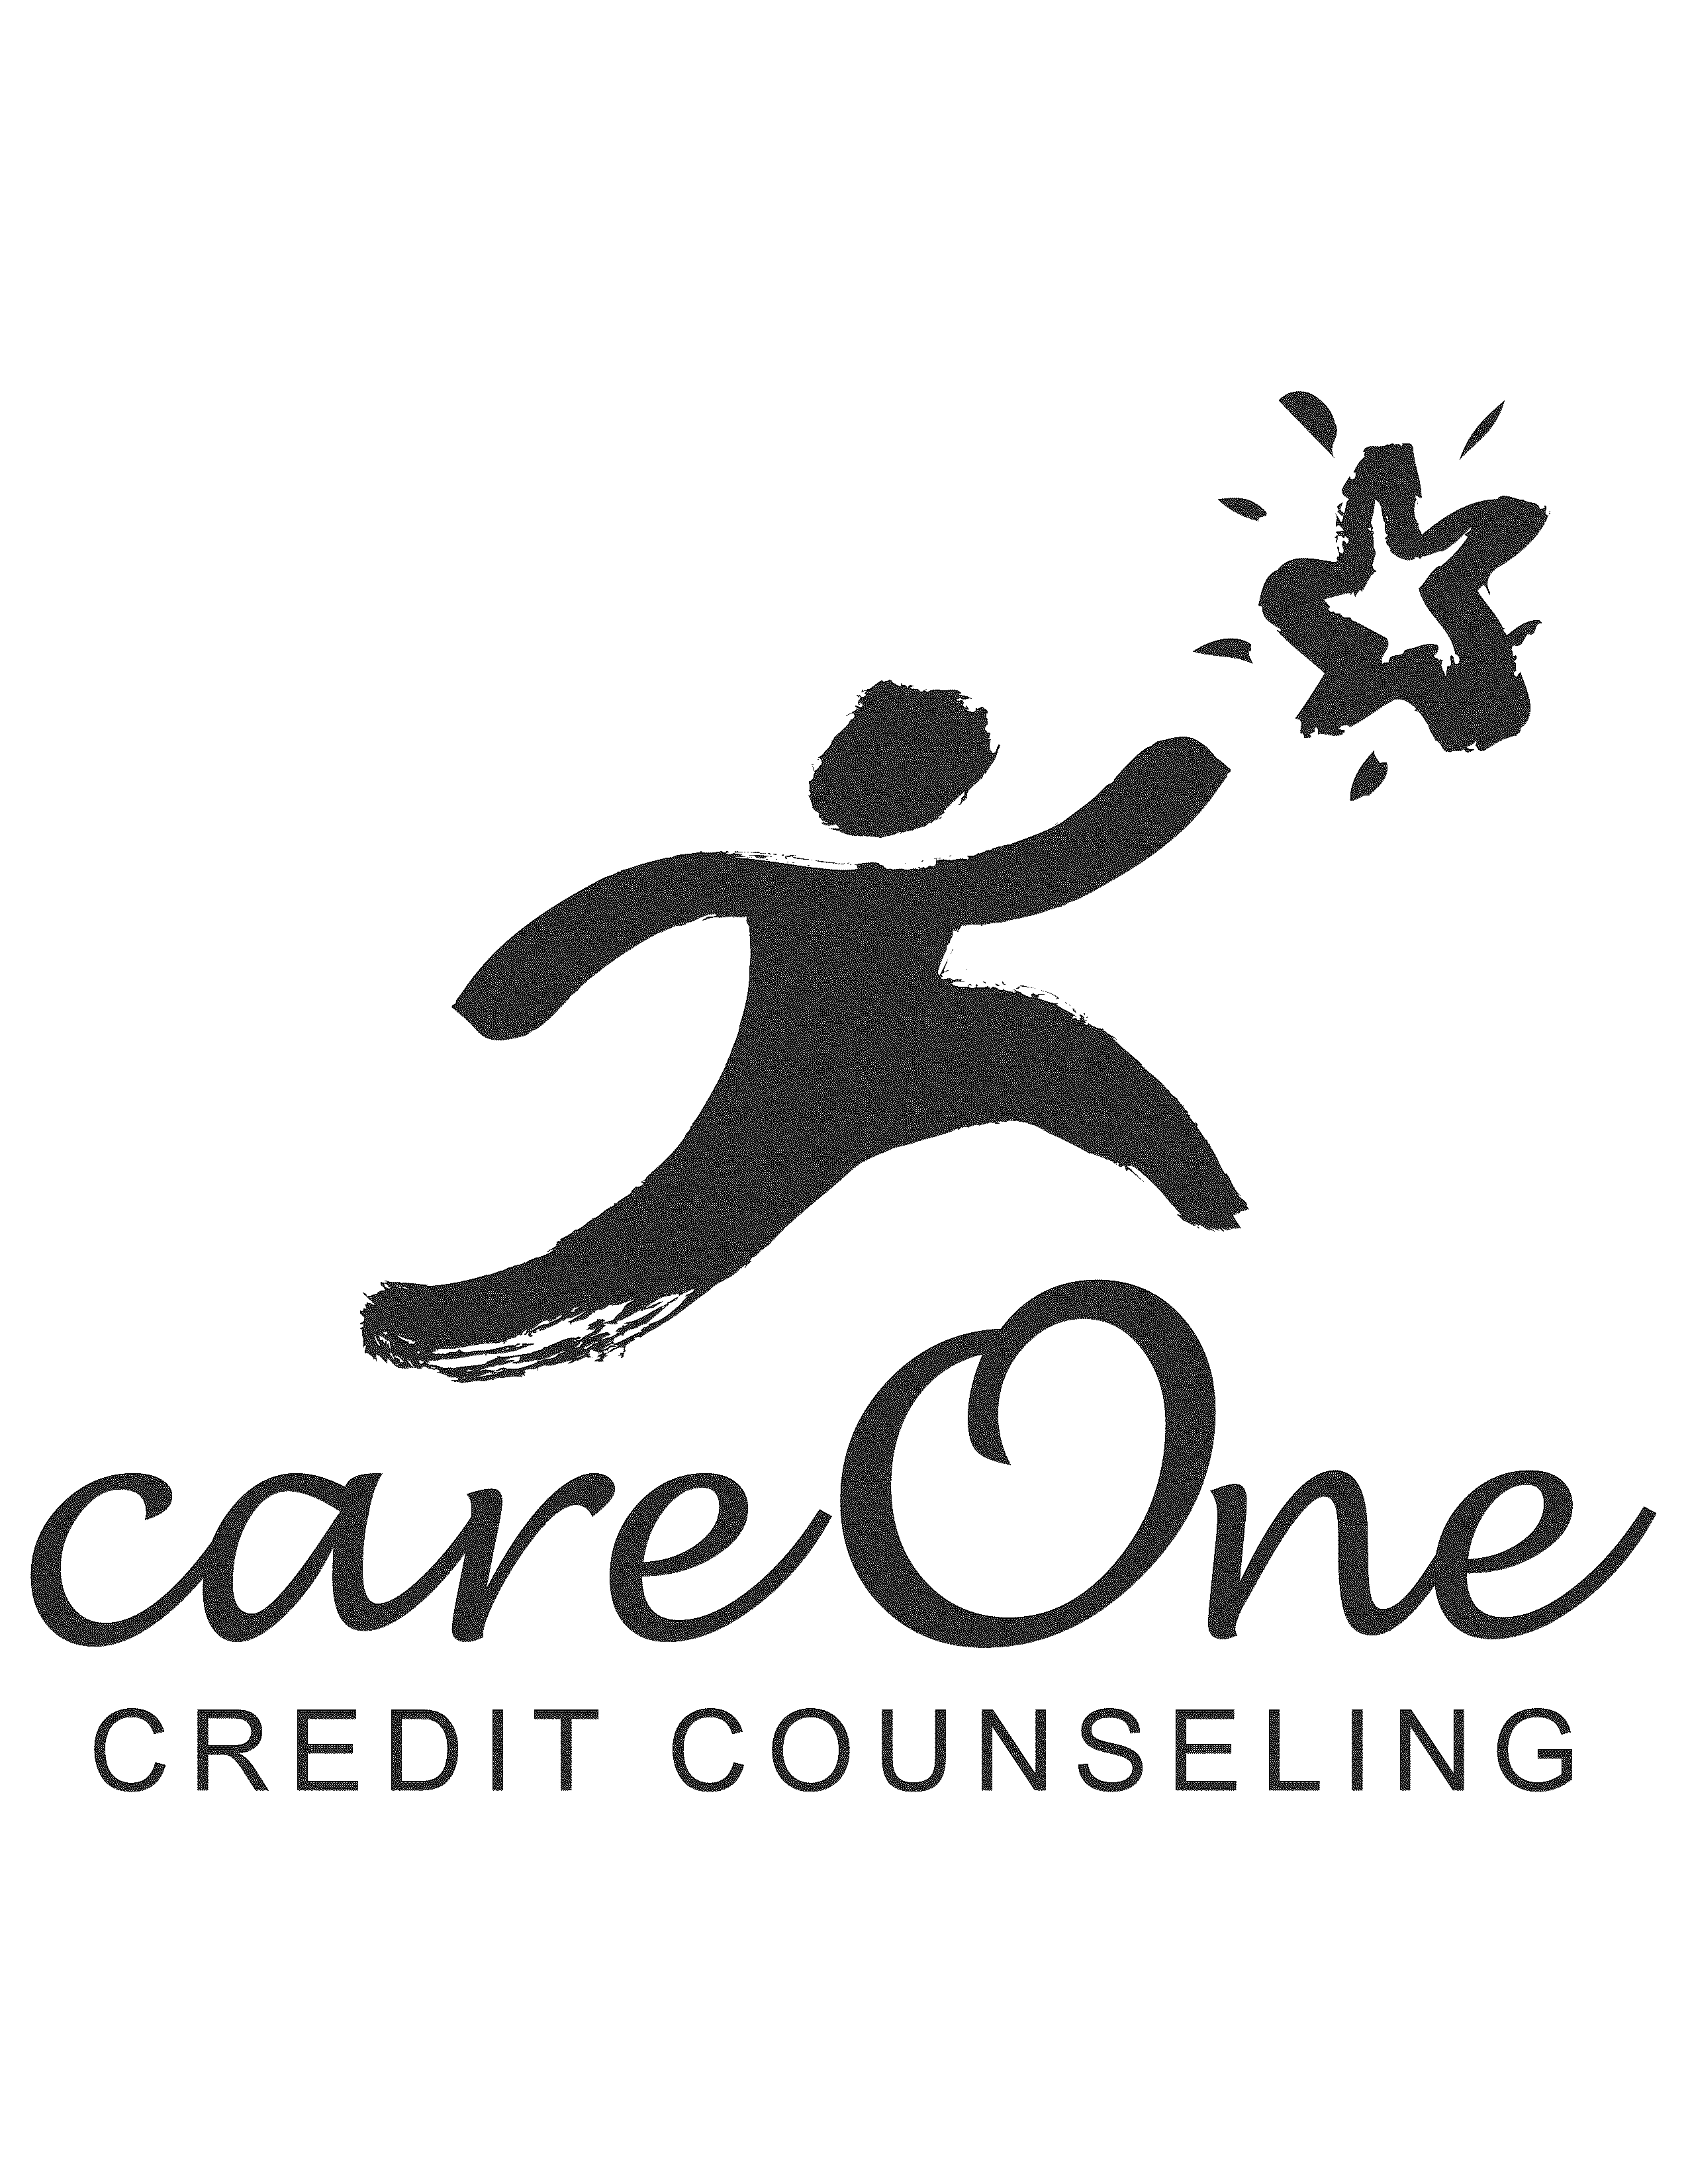  CAREONE CREDIT COUNSELING